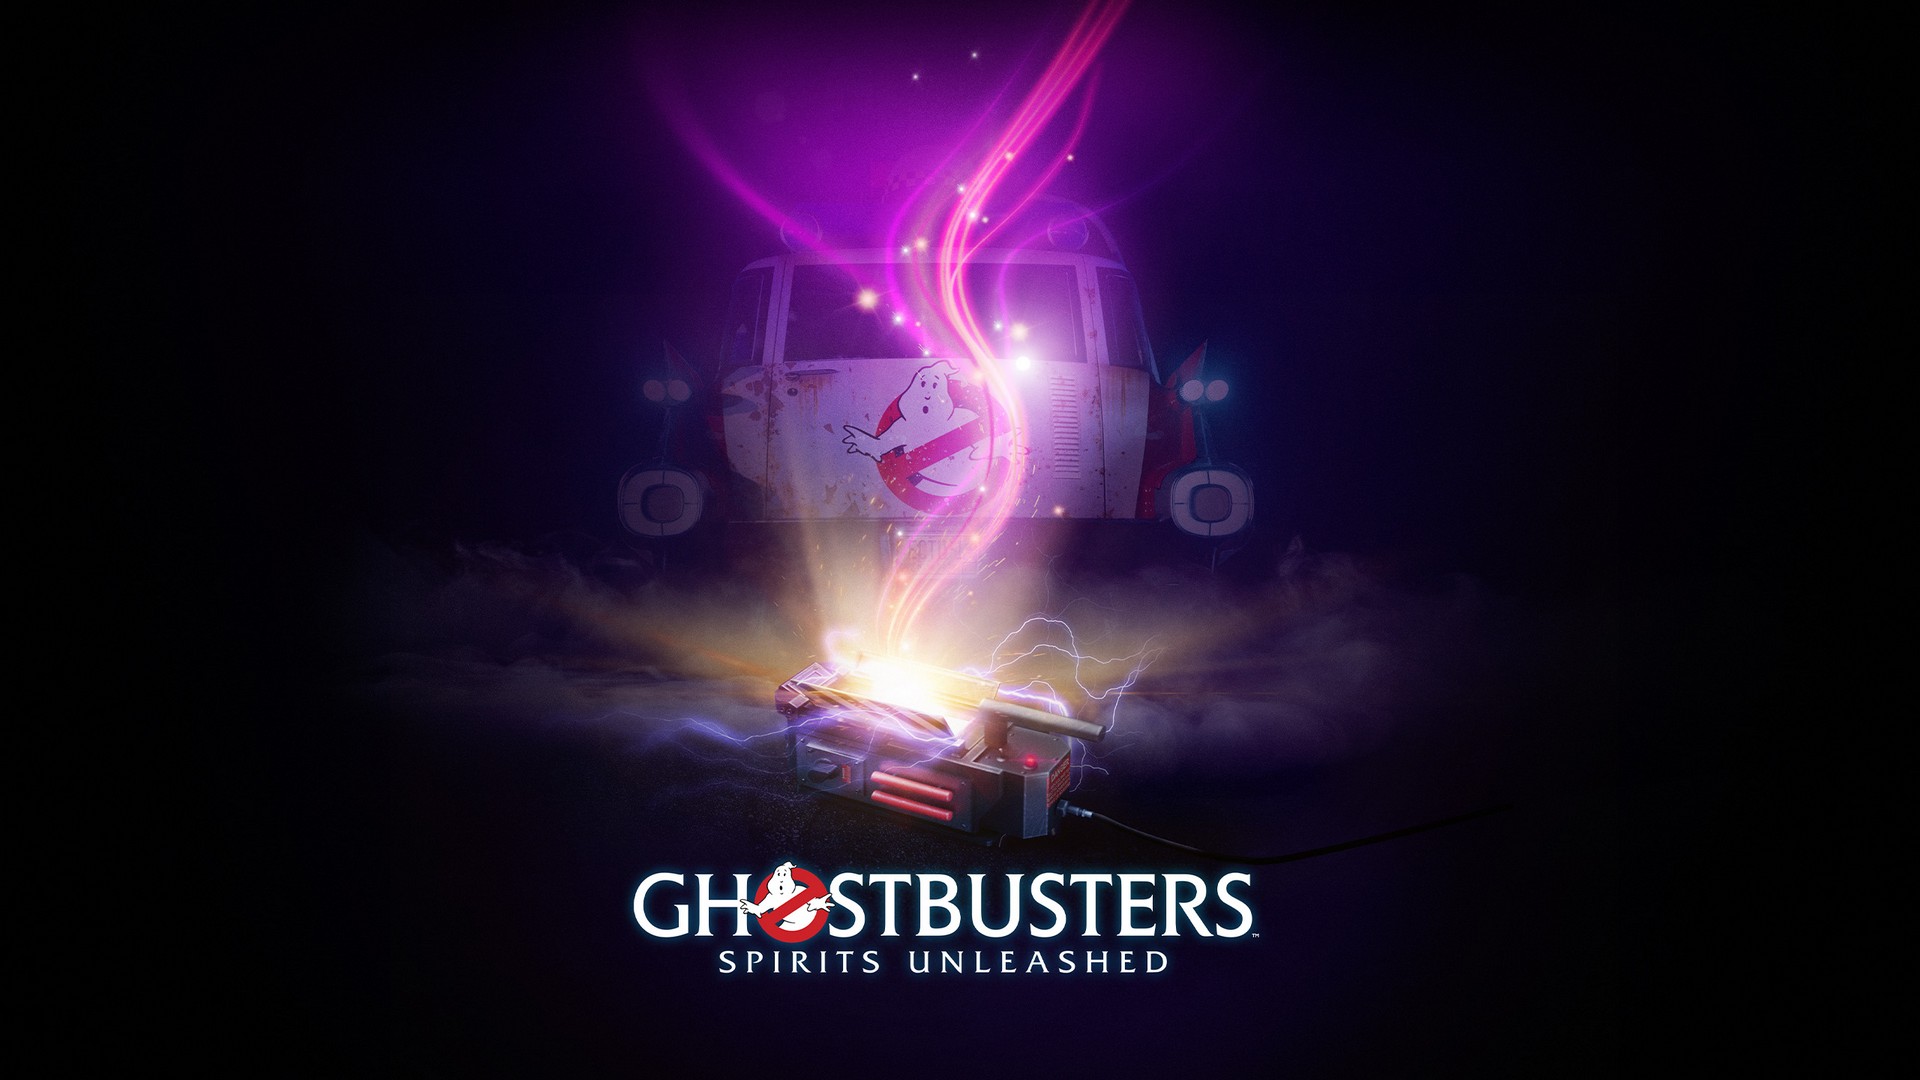 Ghostbusters: Spirits Unleashed Will See Additional Maps, Ghosts, & More